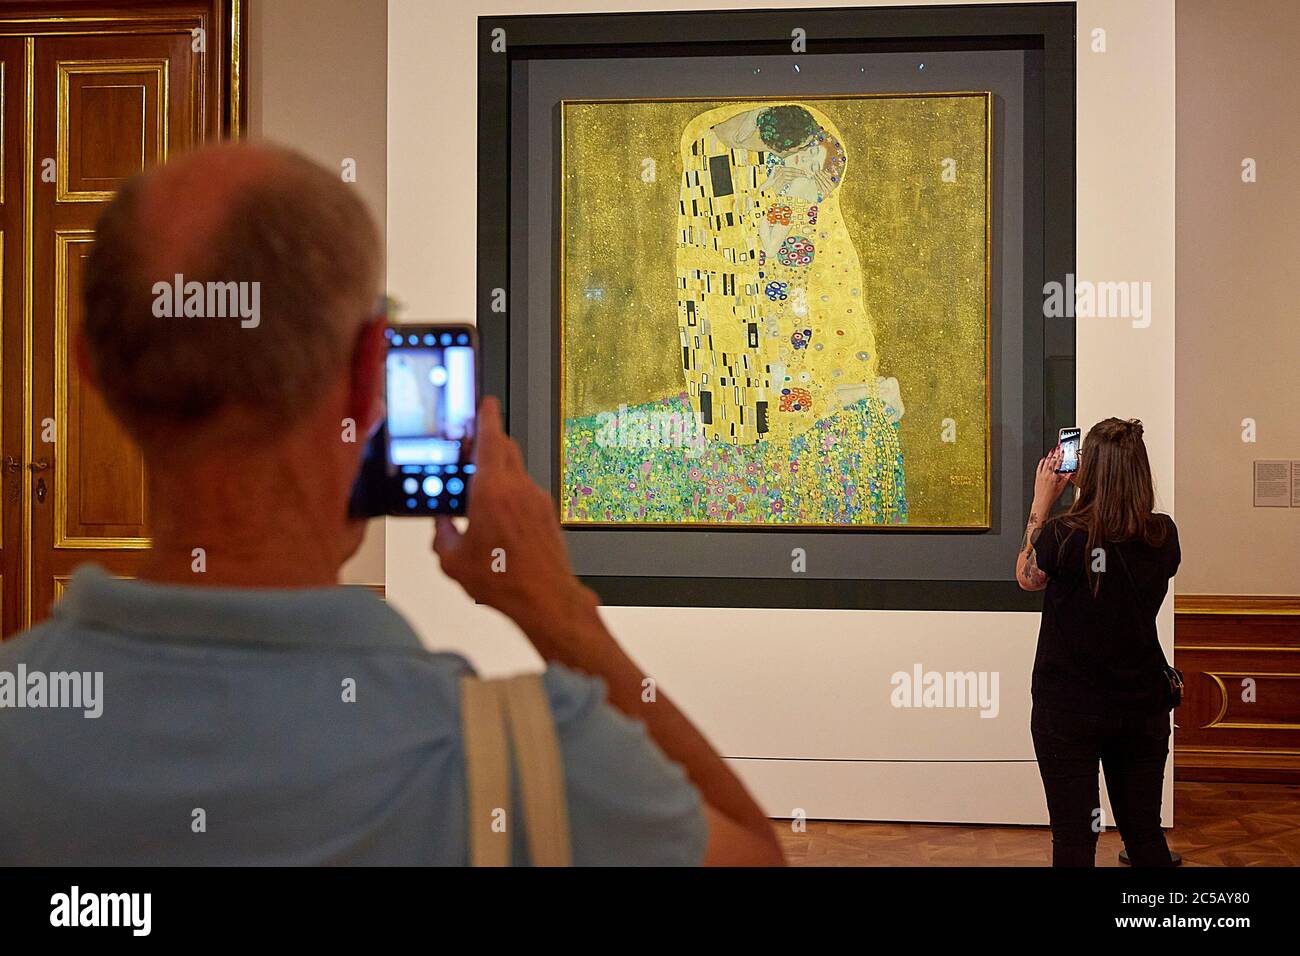 Vienna, Austria. 1st July, 2020. People take photos of The Kiss (Lovers) by Gustav Klimt at the Upper Belvedere in Vienna, Austria, on July 1, 2020. The Upper Belvedere reopened to visitors on Wednesday after a temporary closure due to the COVID-19 pandemic. Credit: Georges Schneider/Xinhua/Alamy Live News Stock Photo